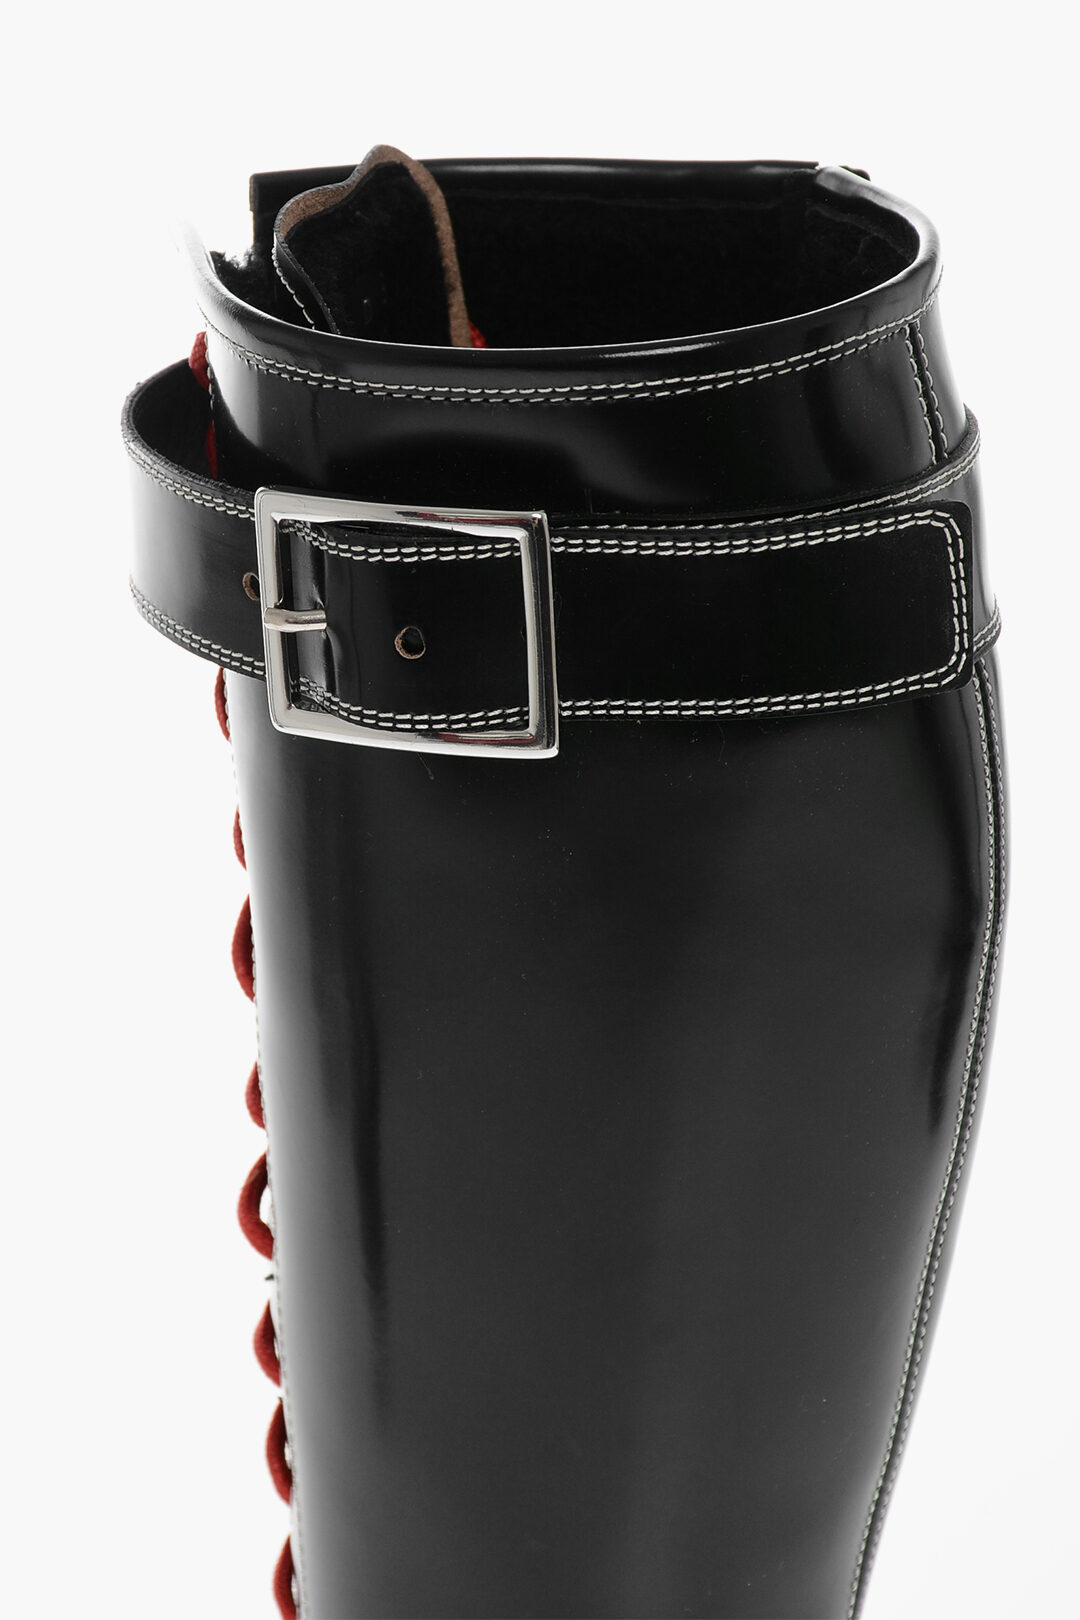 Alexander McQueen Ankle Boots in Nappa with Zip